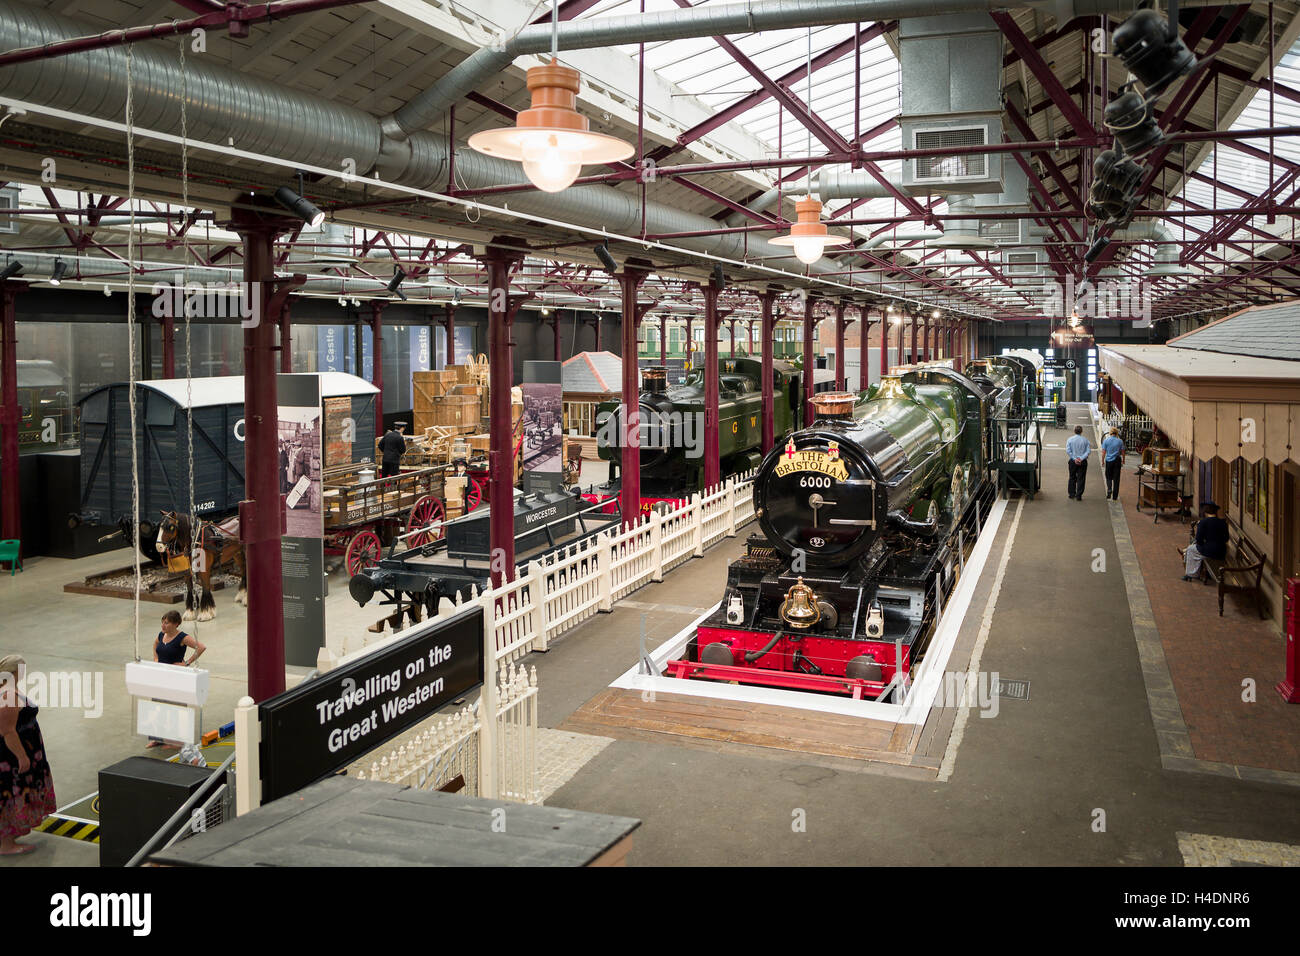 High level view of the replica GWR railway station in STEAM museum Swindon UK Stock Photo